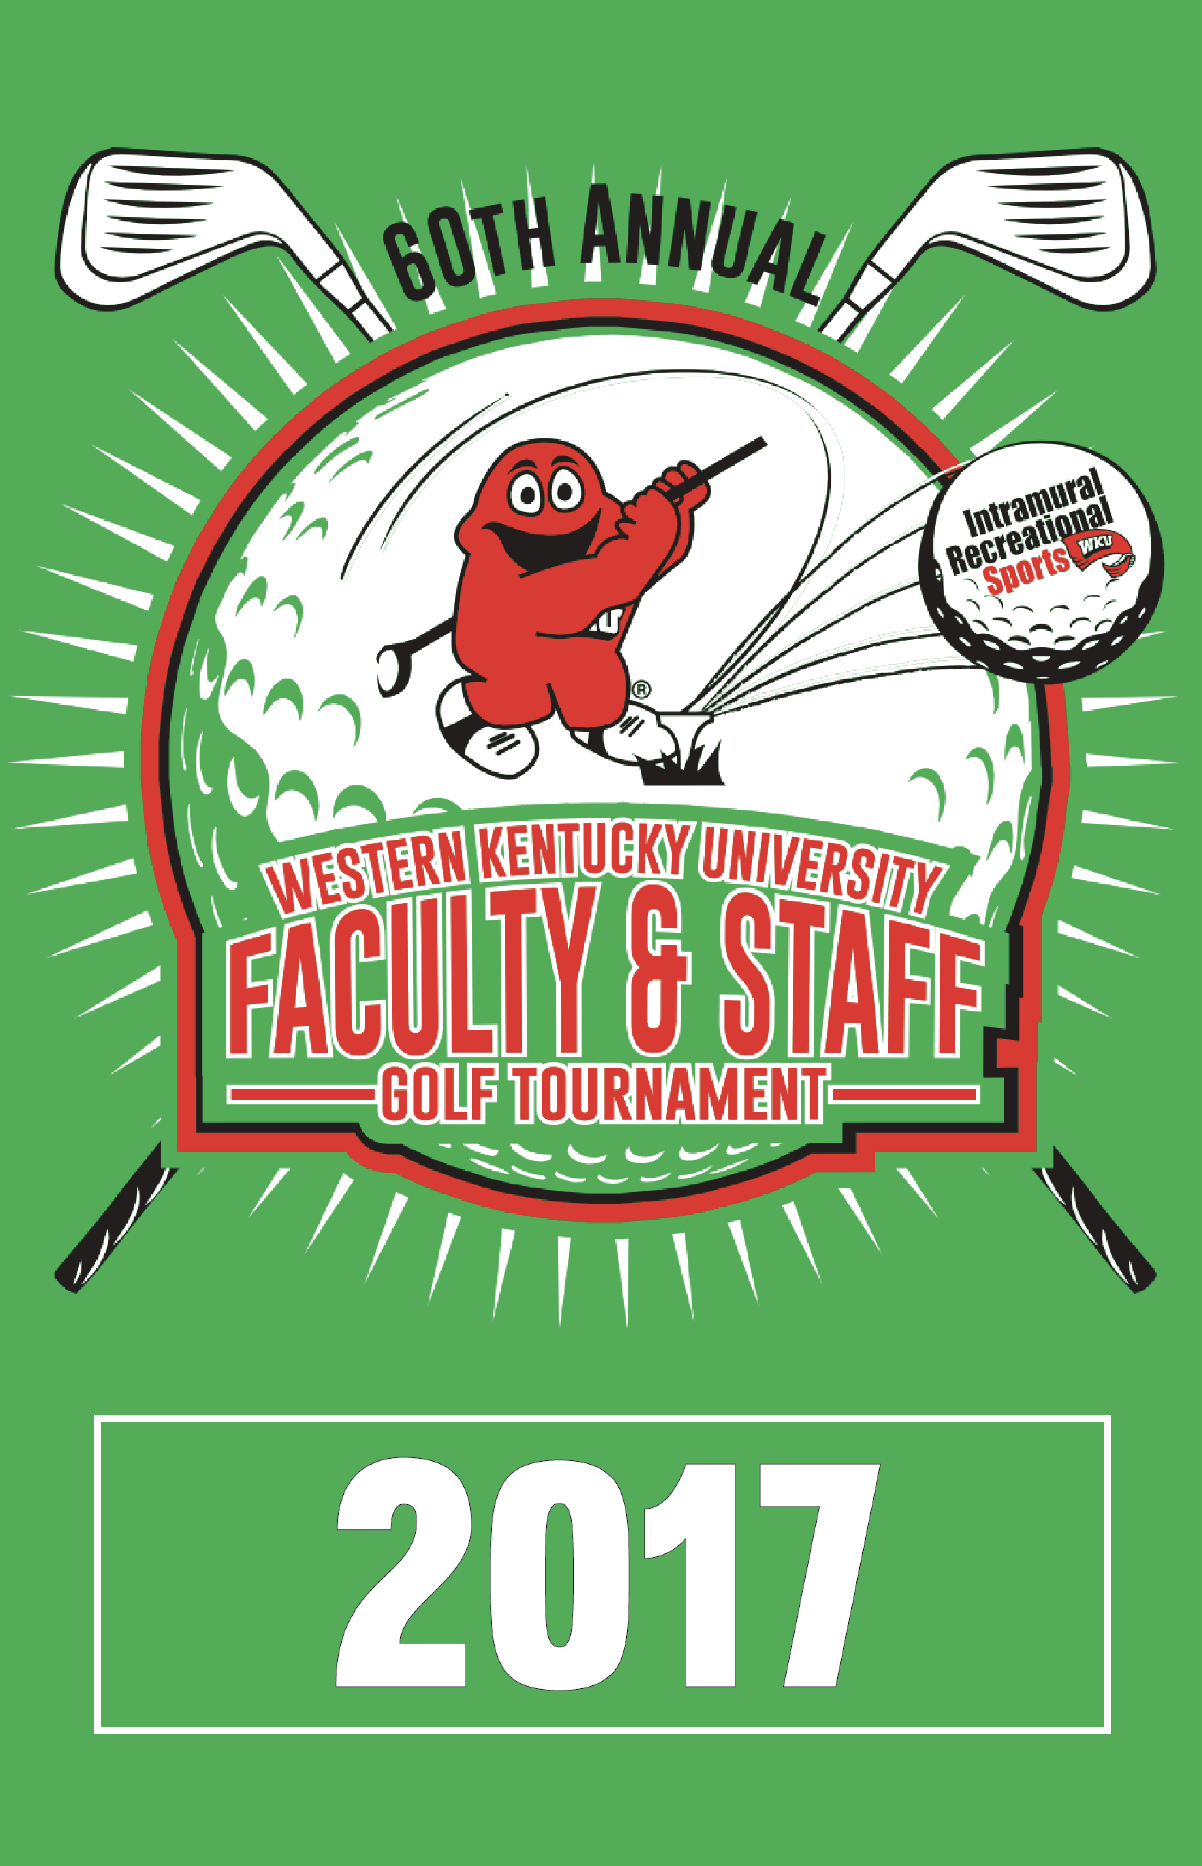 60th Annual Faculty & Staff Tournament 